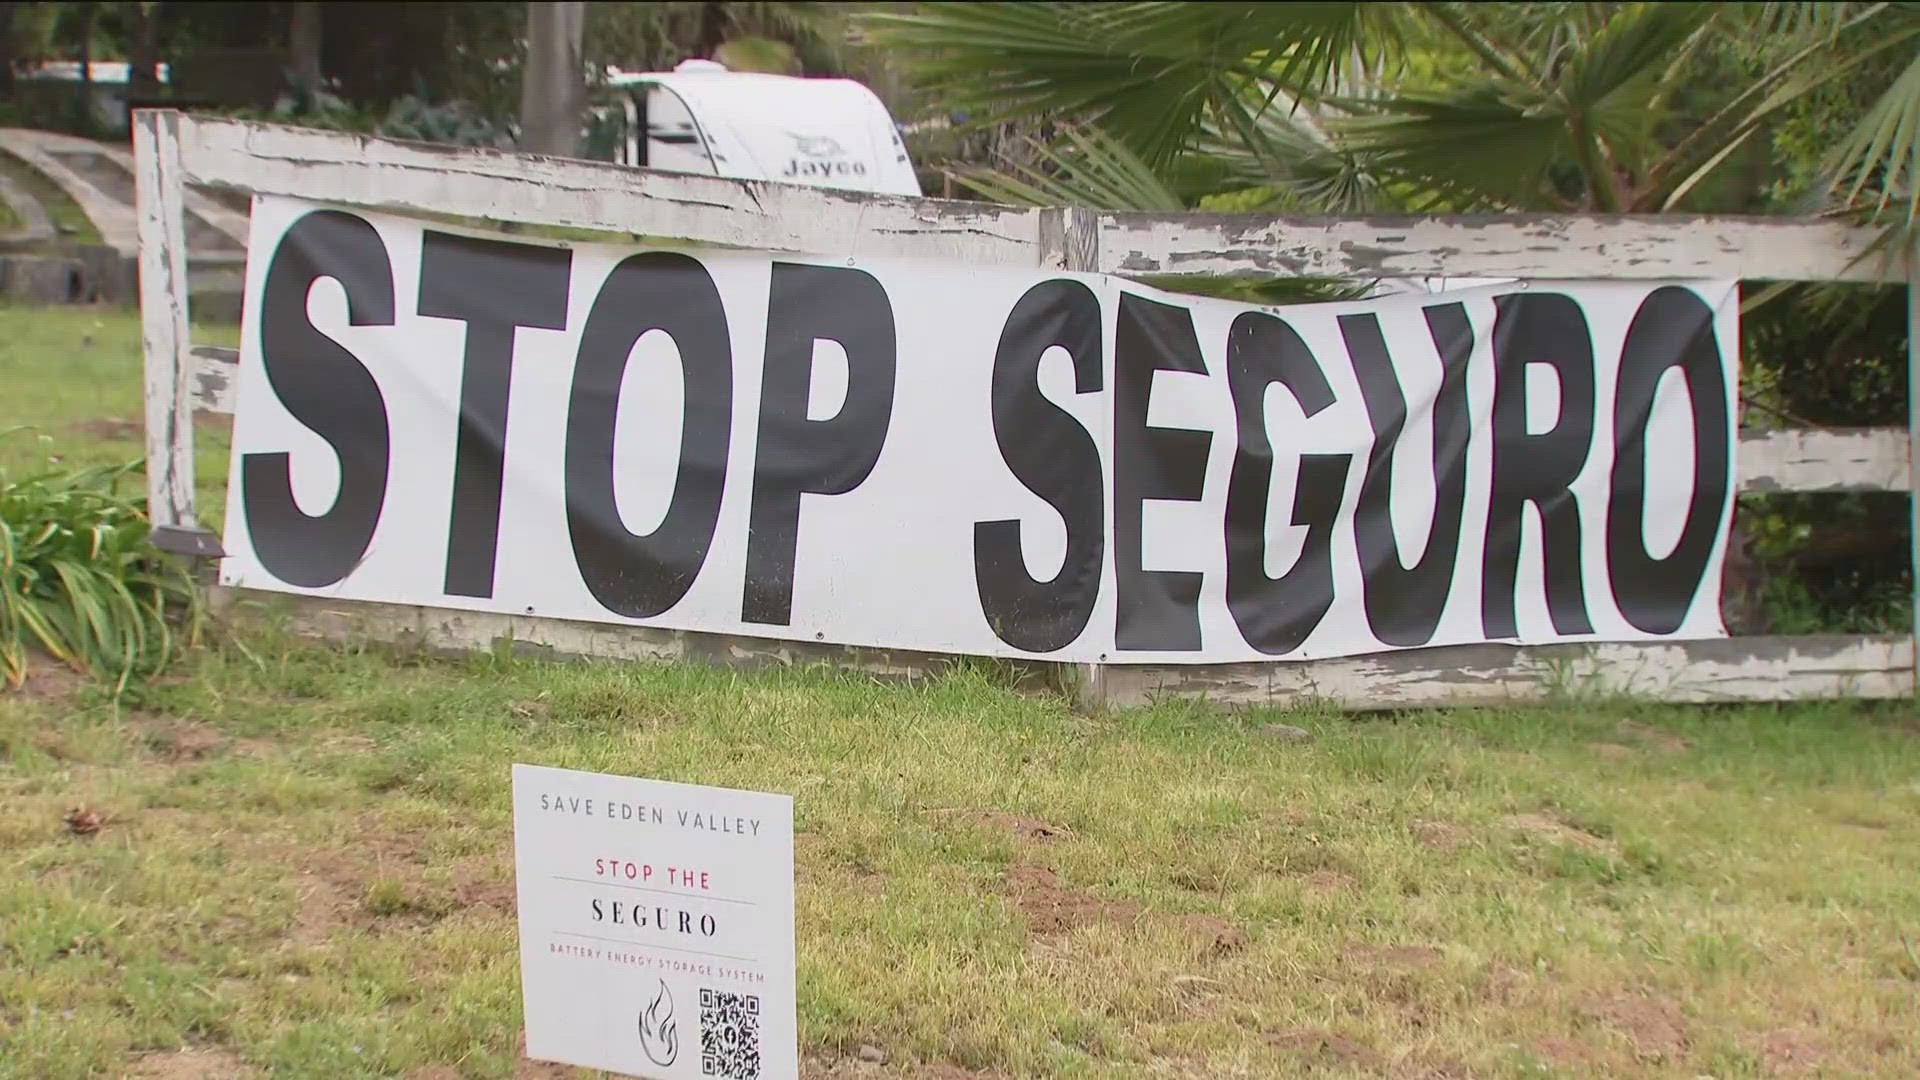 Residents gathered 2,500 signatures on a petition to stop the Seguro battery plant from moving forward, citing fire danger and noise concerns.